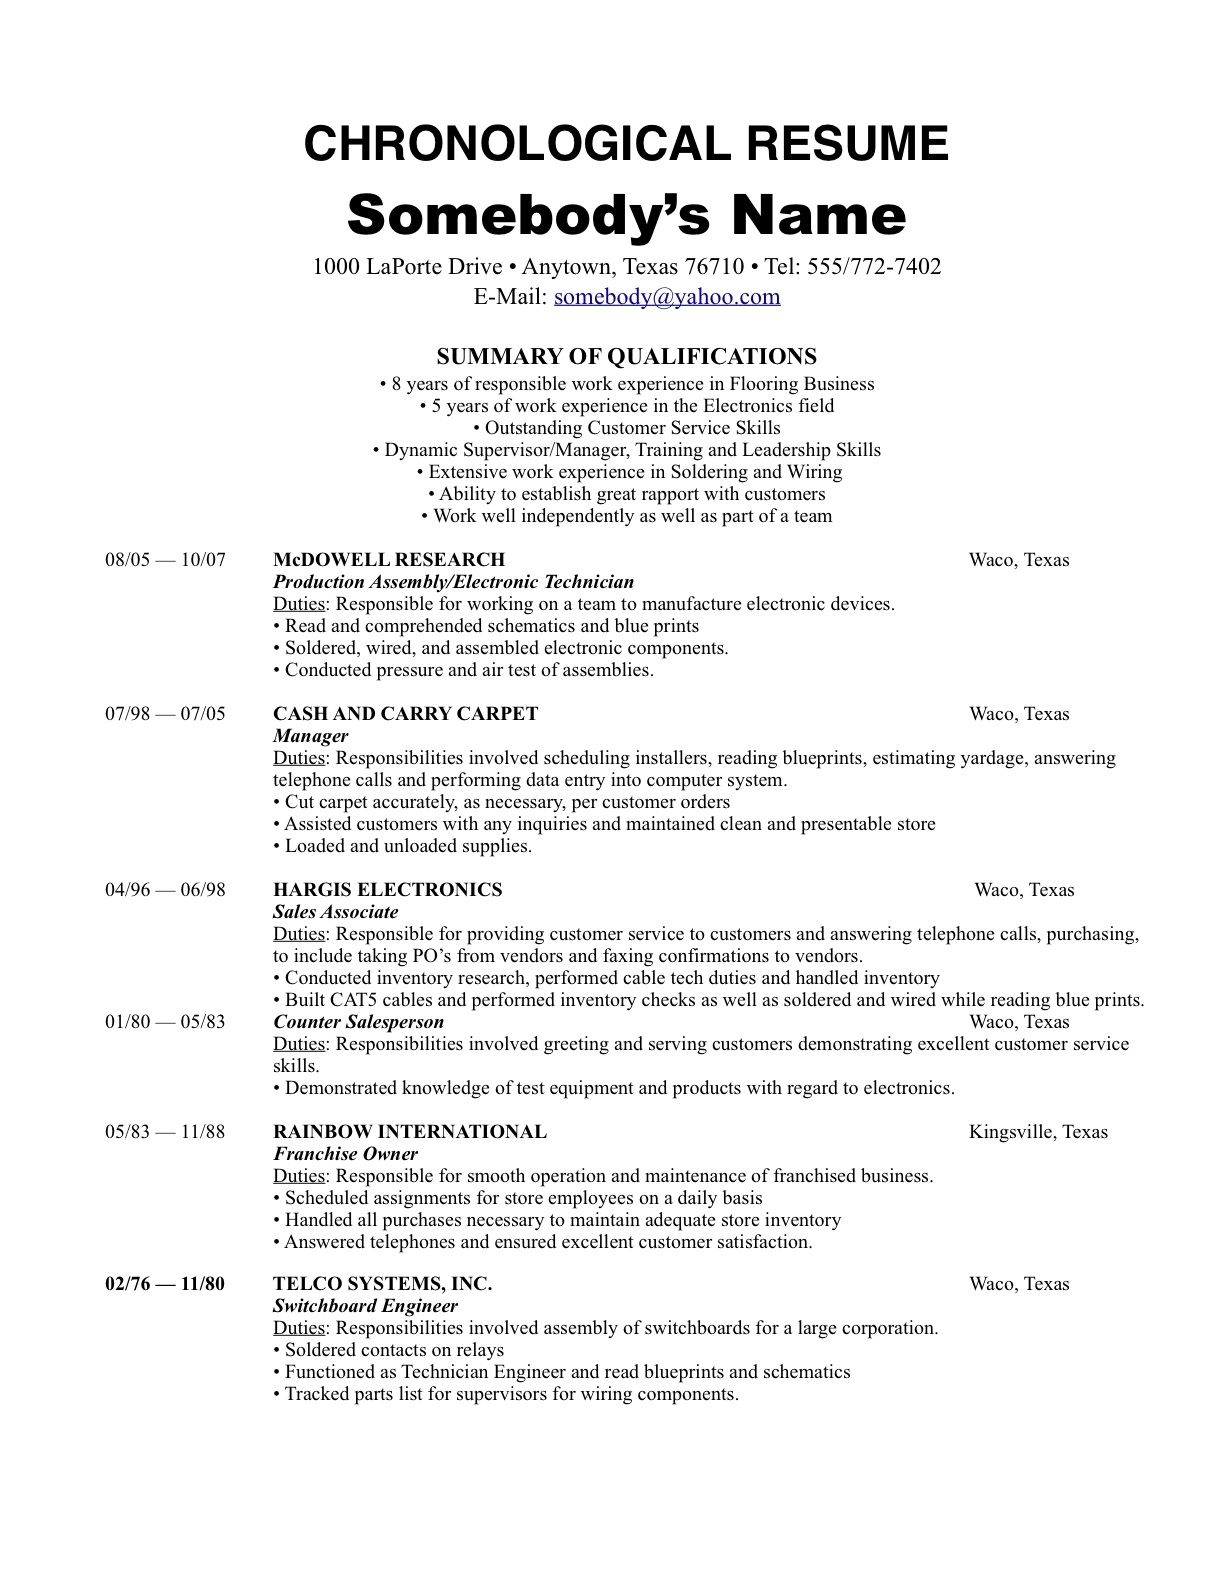 Chronological Order Resume Example Dc0364f86 The Most Reverse inside size 1224 X 1584